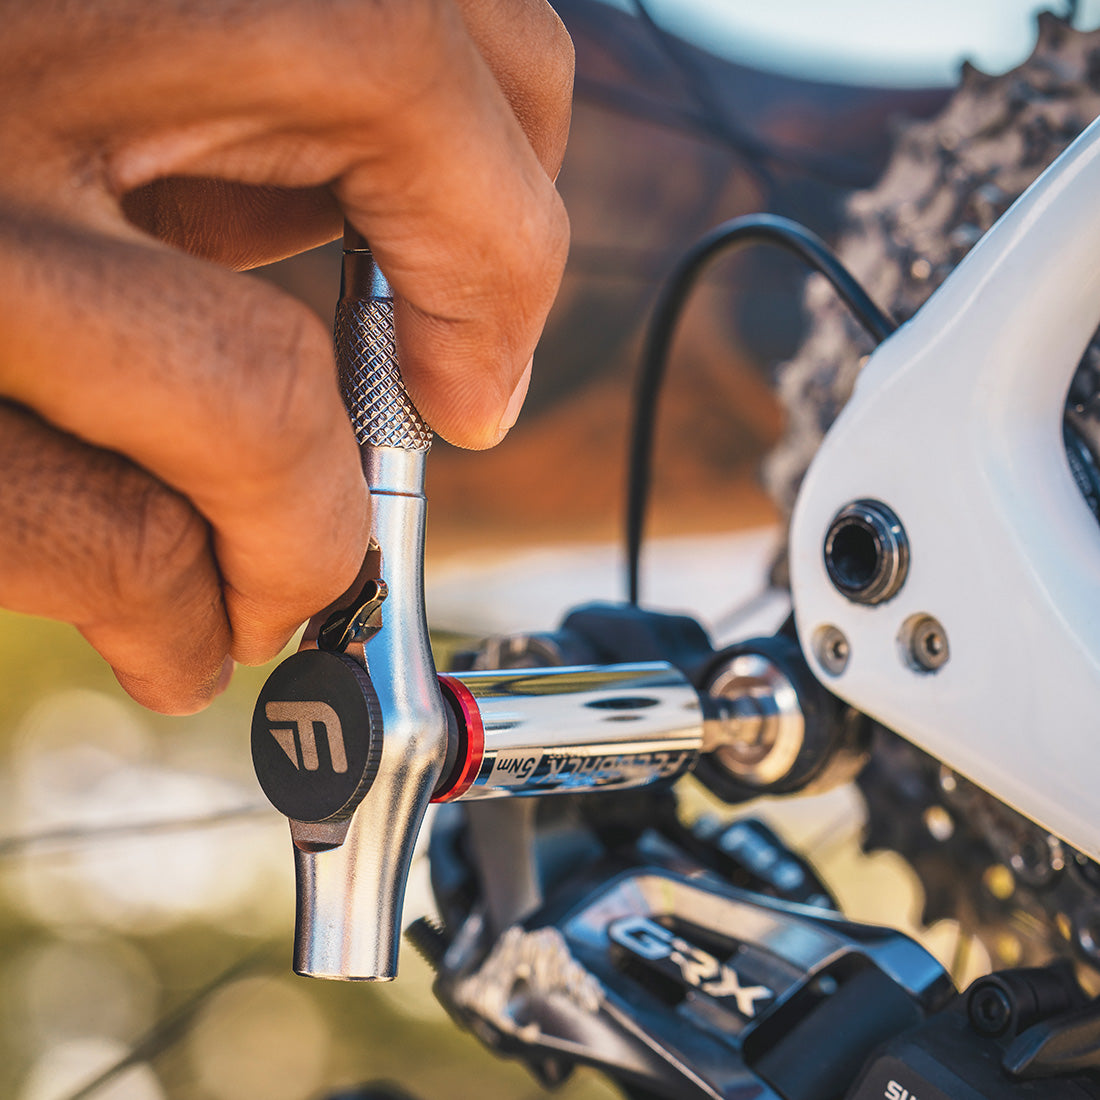 feedback sports reflex fixed torque ratchet kit being used on a bike